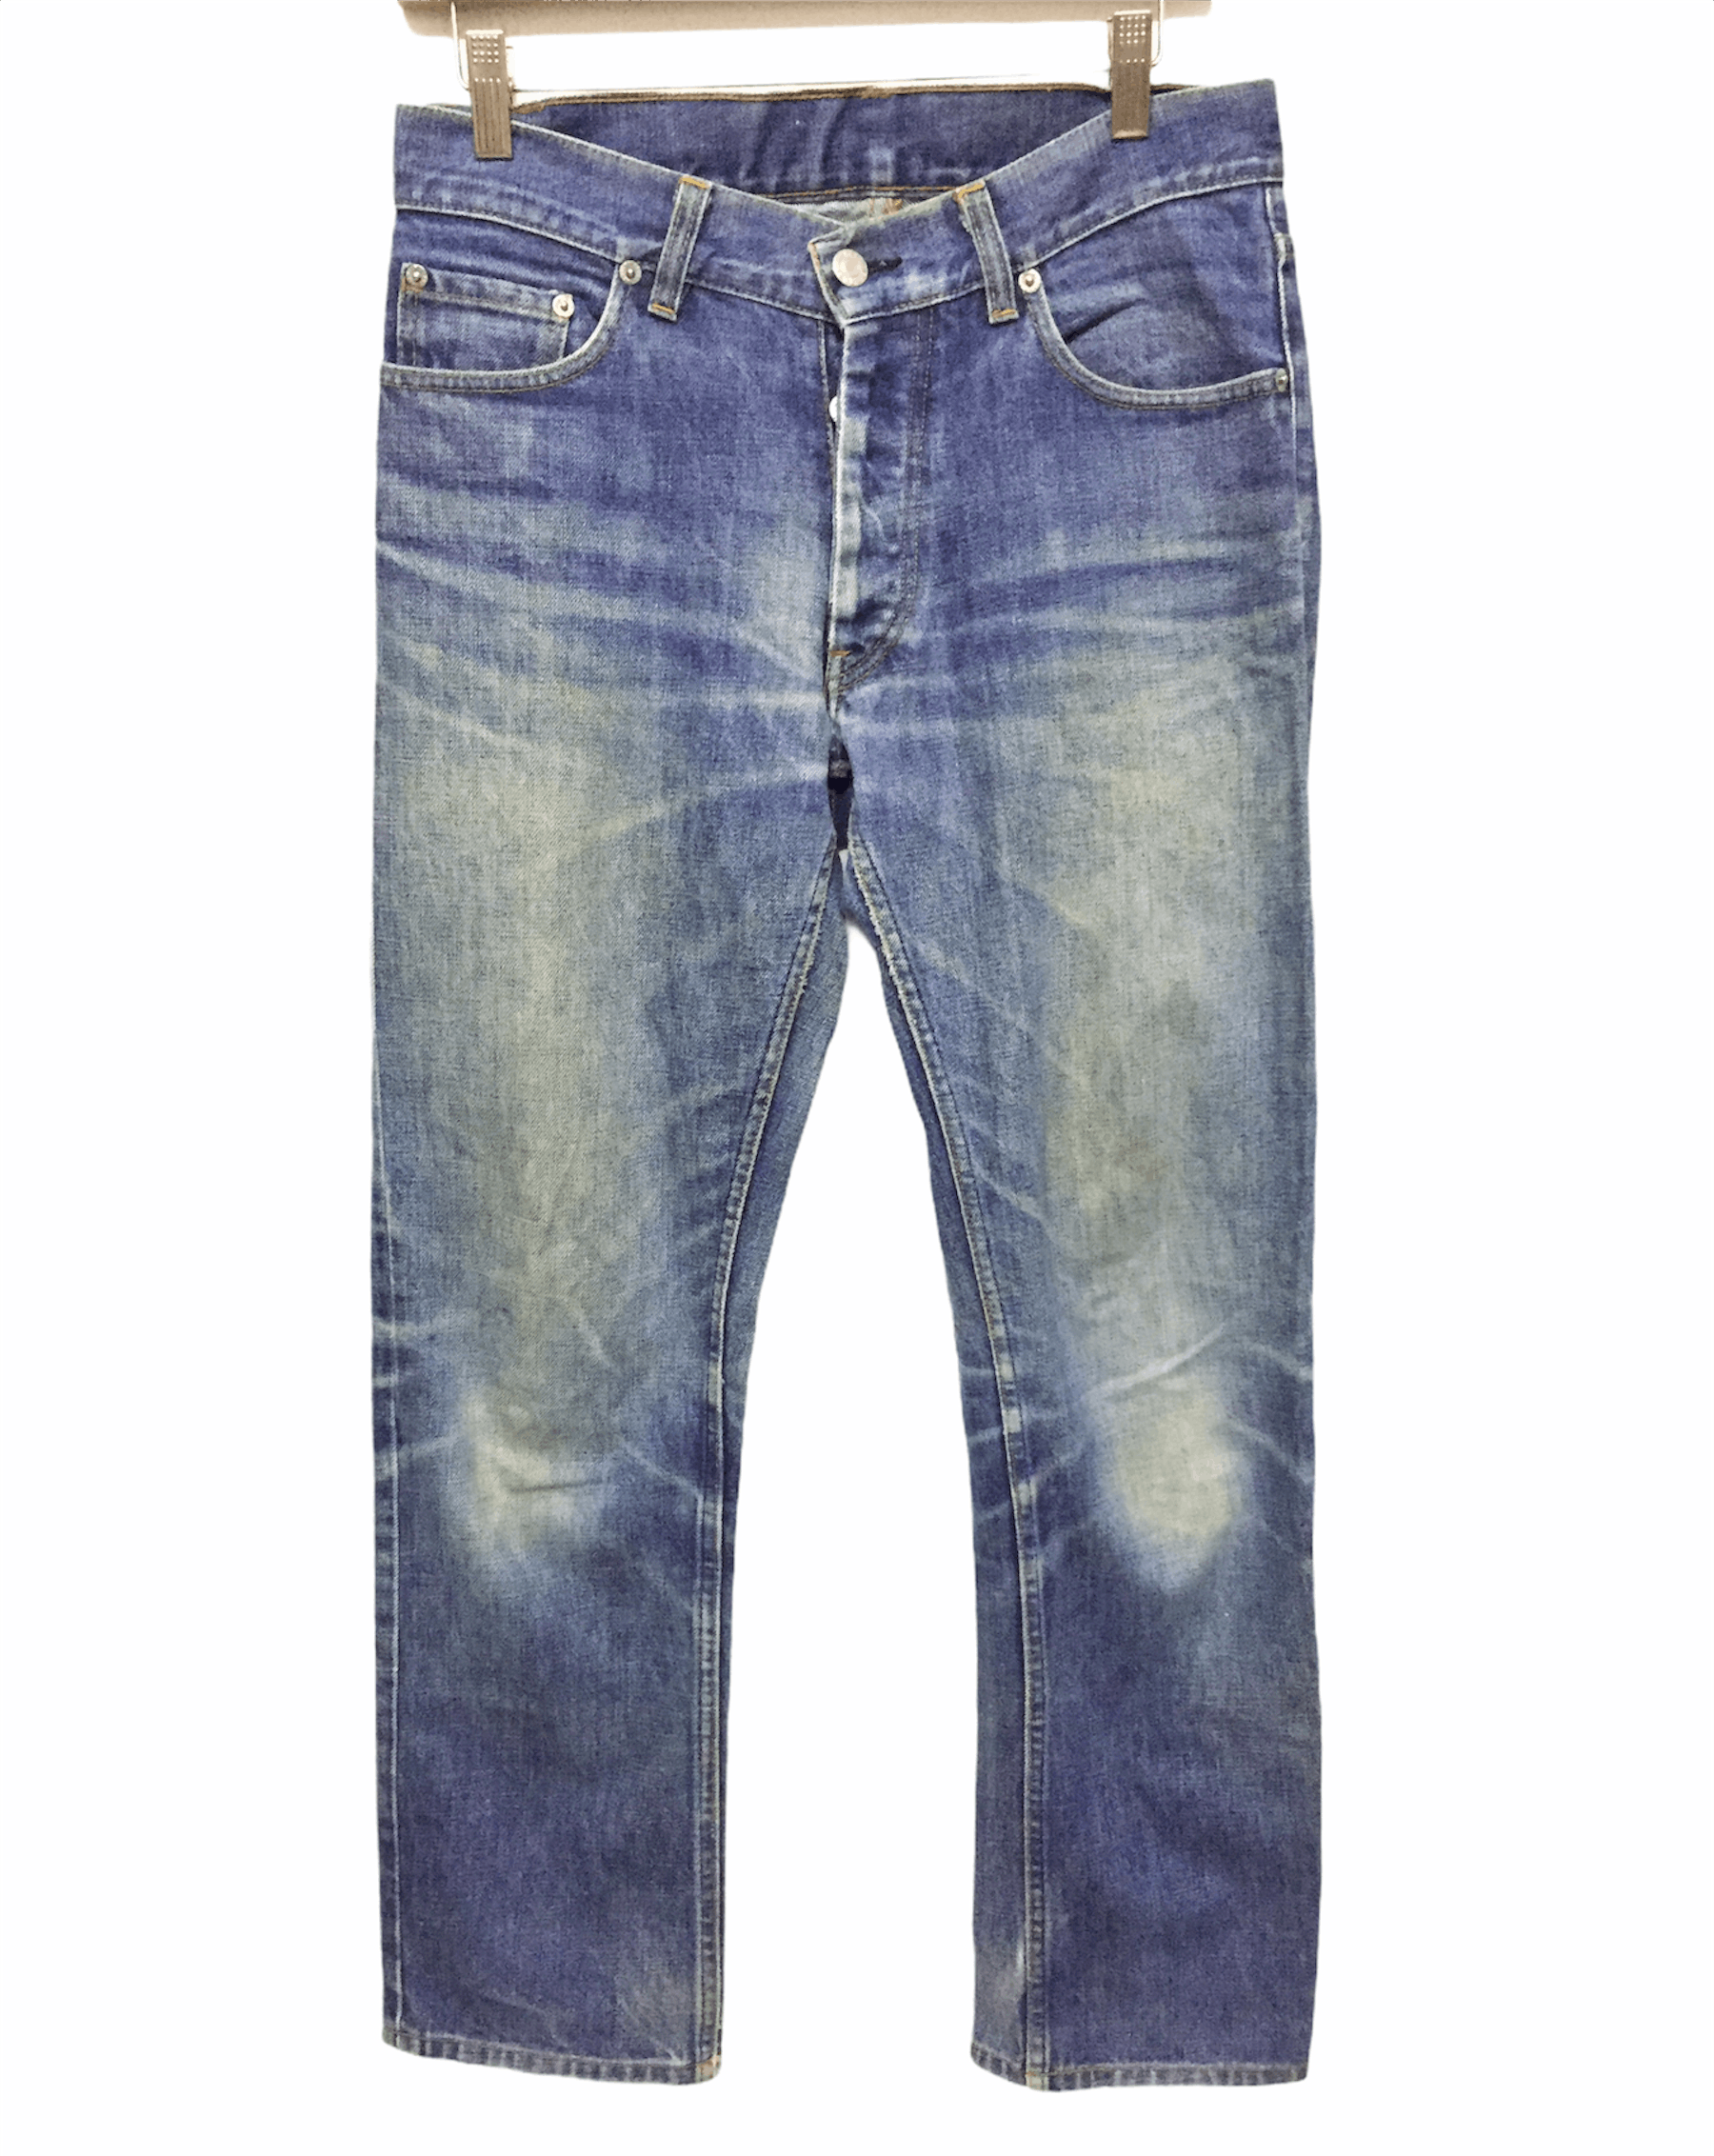 Helmut Lang SS98 faded denim Size US 29 - 2 Preview